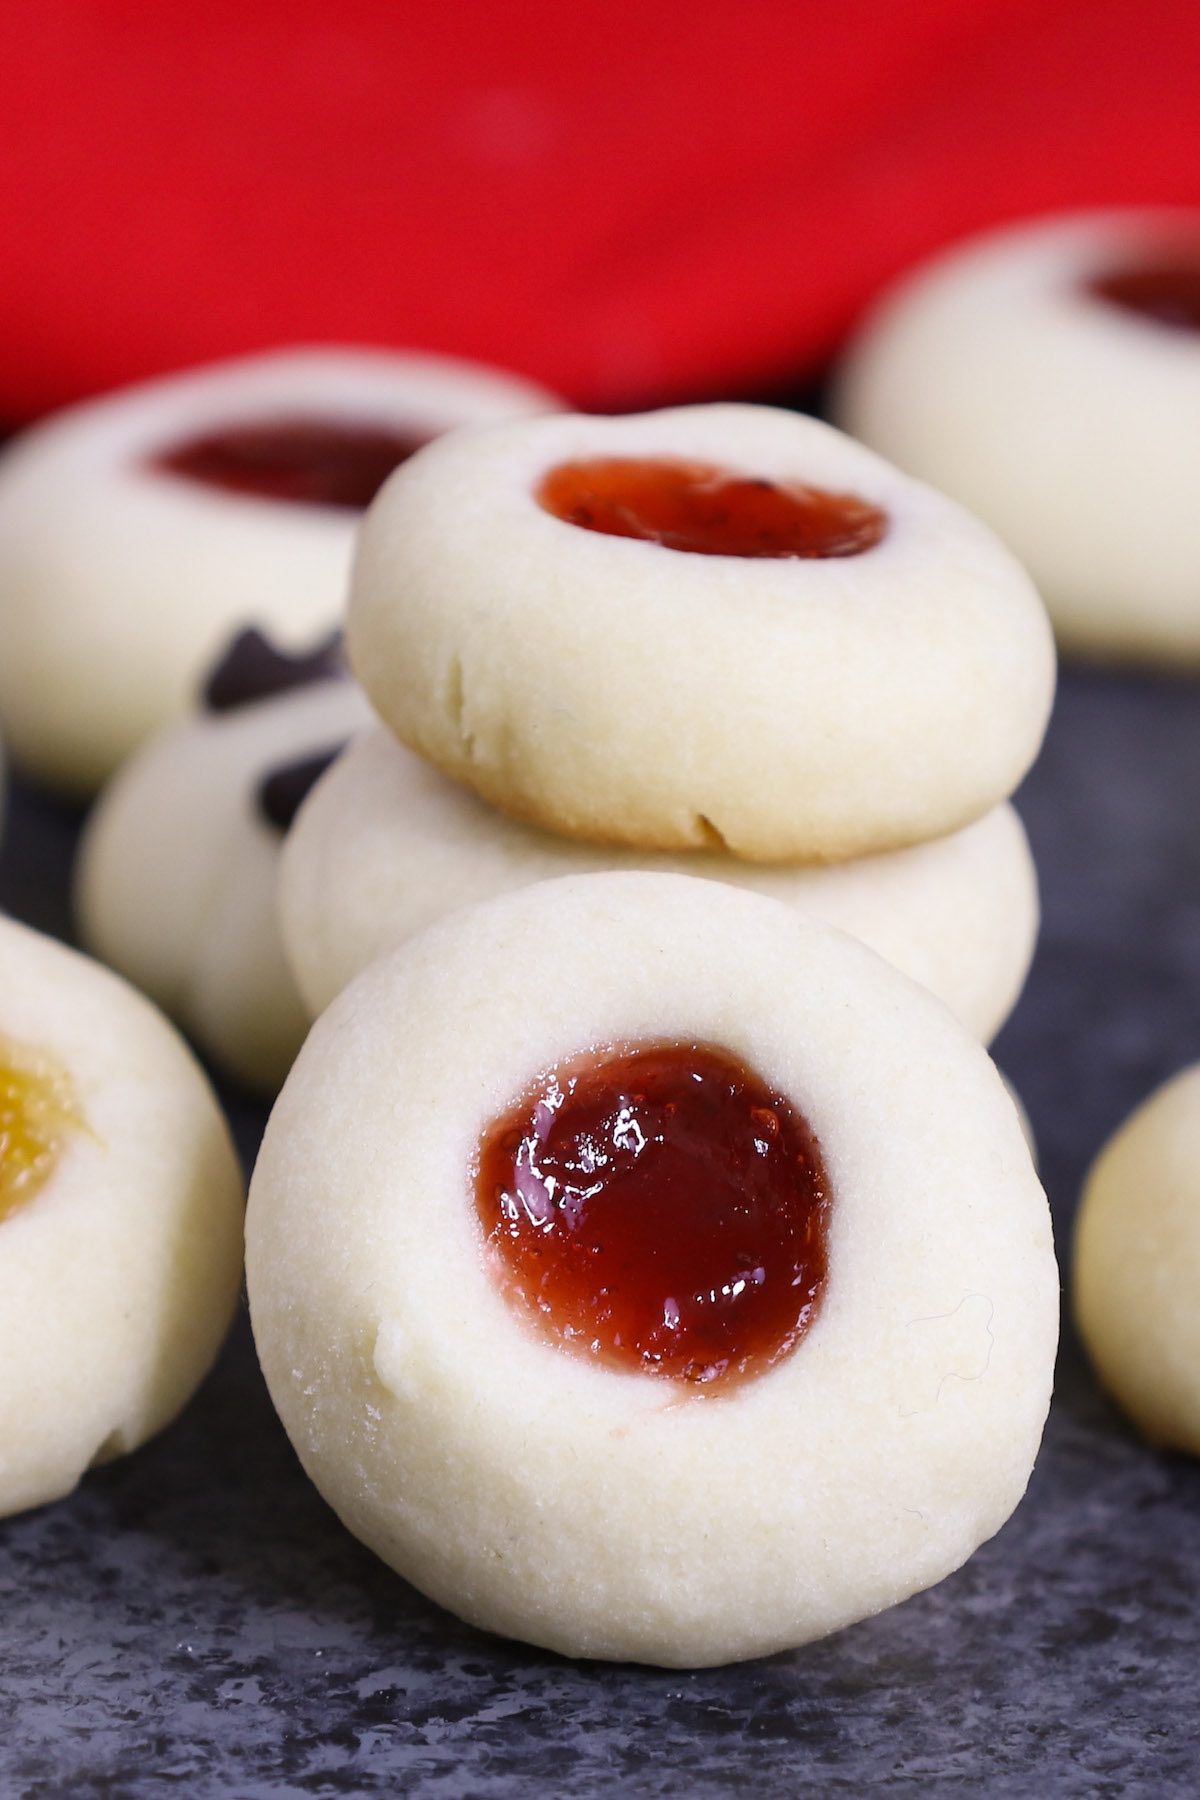 Thumbprint Cookies combine soft, buttery shortbread cookies with your favorite fillings for the perfect Christmas treat! The dough is made with just 5 simple ingredients, and then rolled into individual balls. Use your thumb to make an imprint before filling with your favorite jam, chocolate or other delicious fillings!